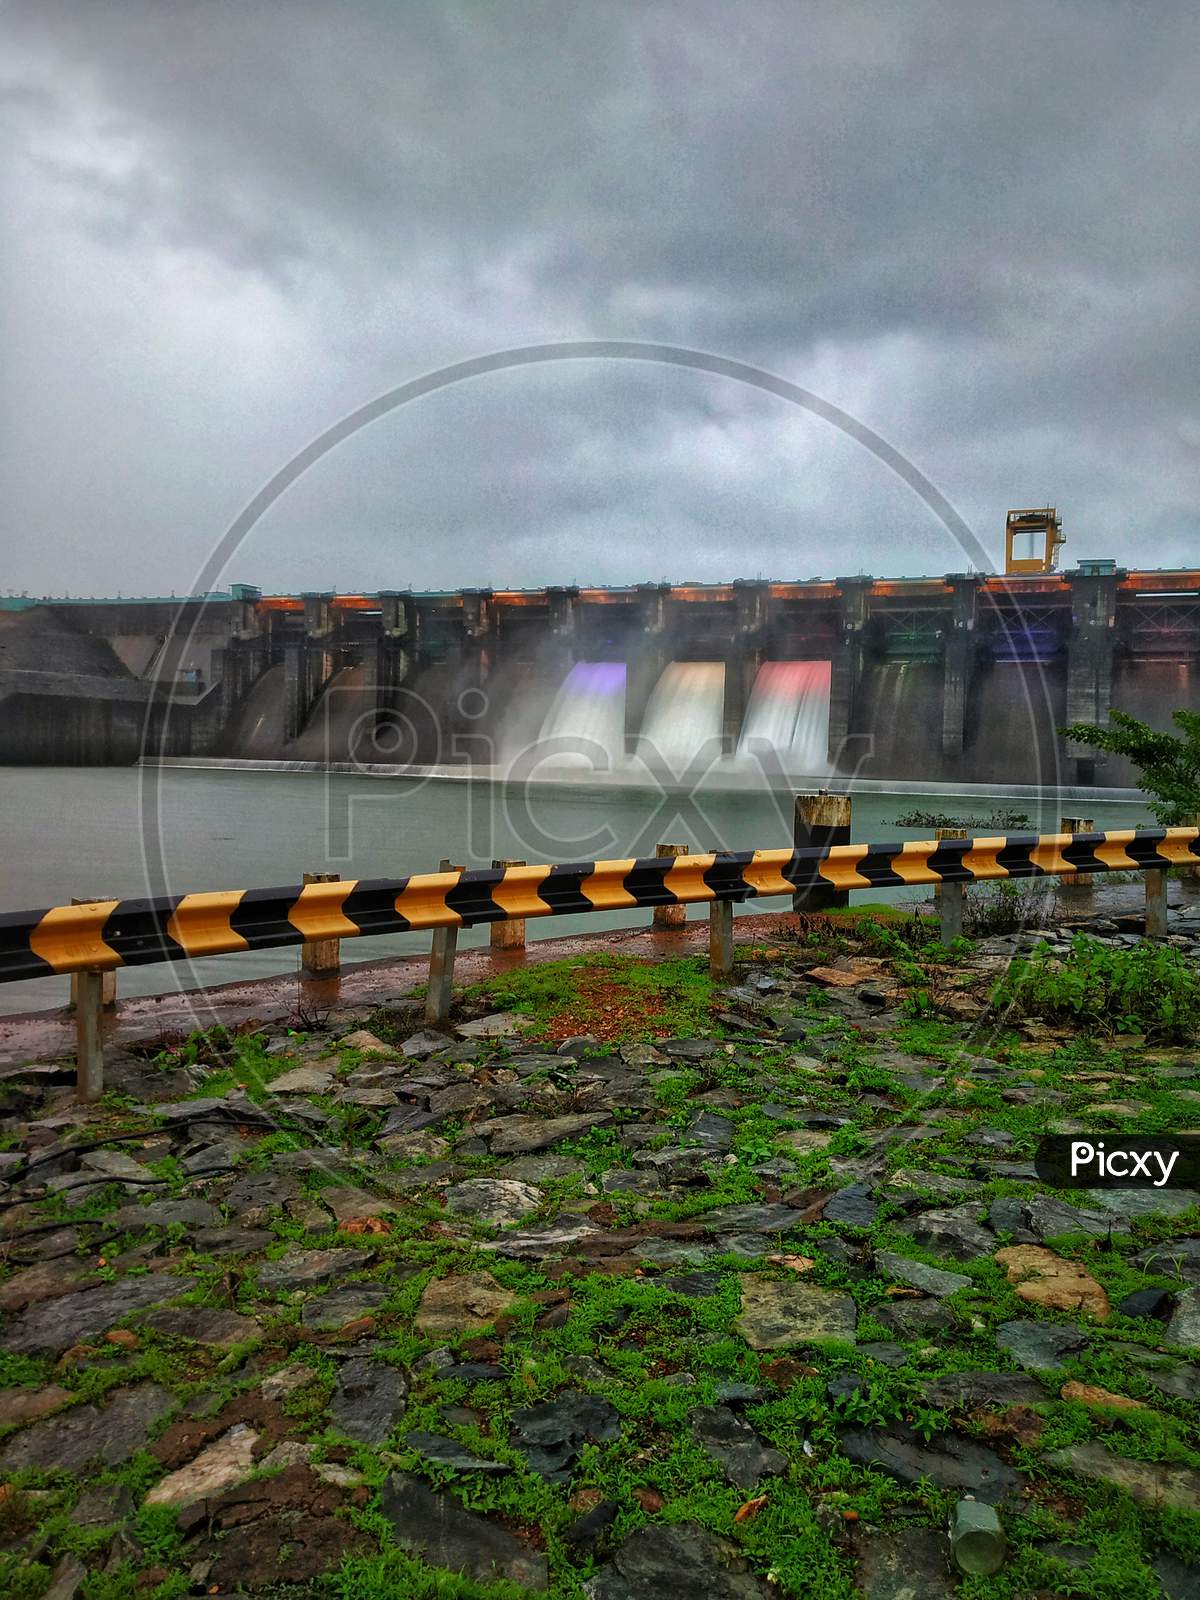 Dam Gates Opened With Colorful Lights On The Water Flowing.